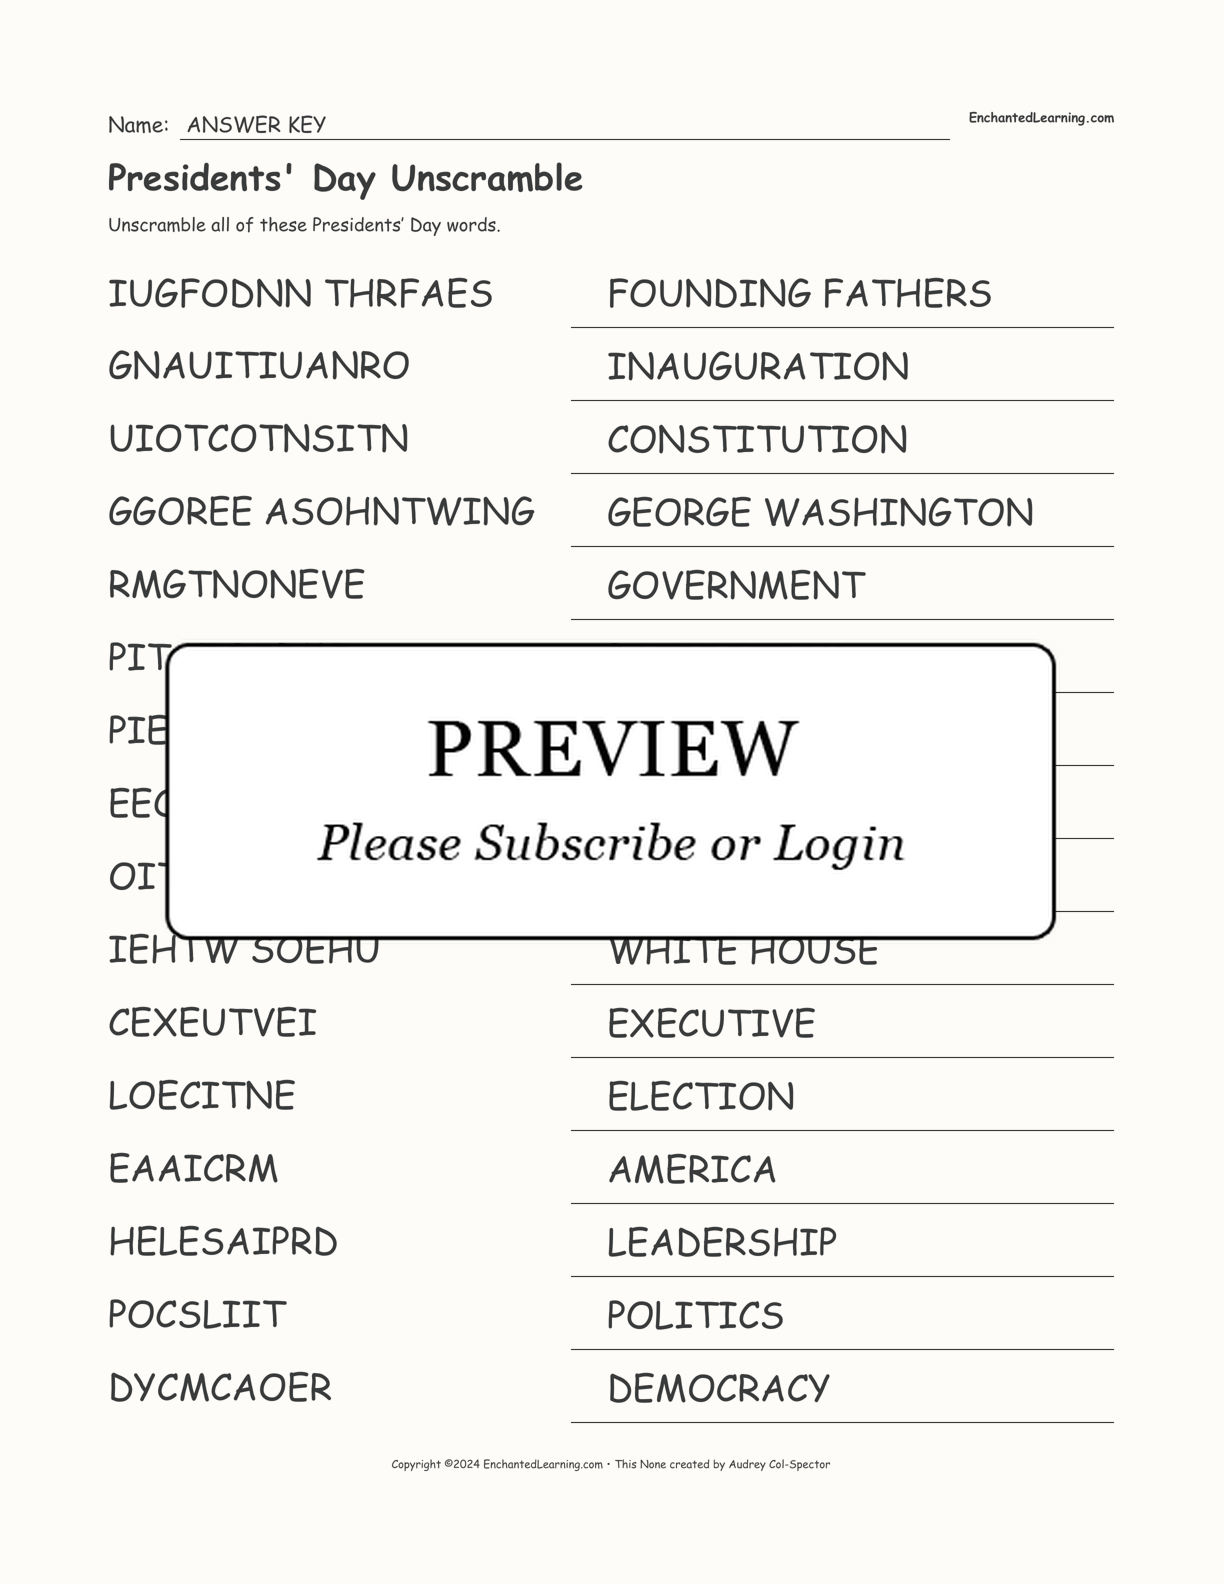 Presidents' Day Unscramble interactive worksheet page 2